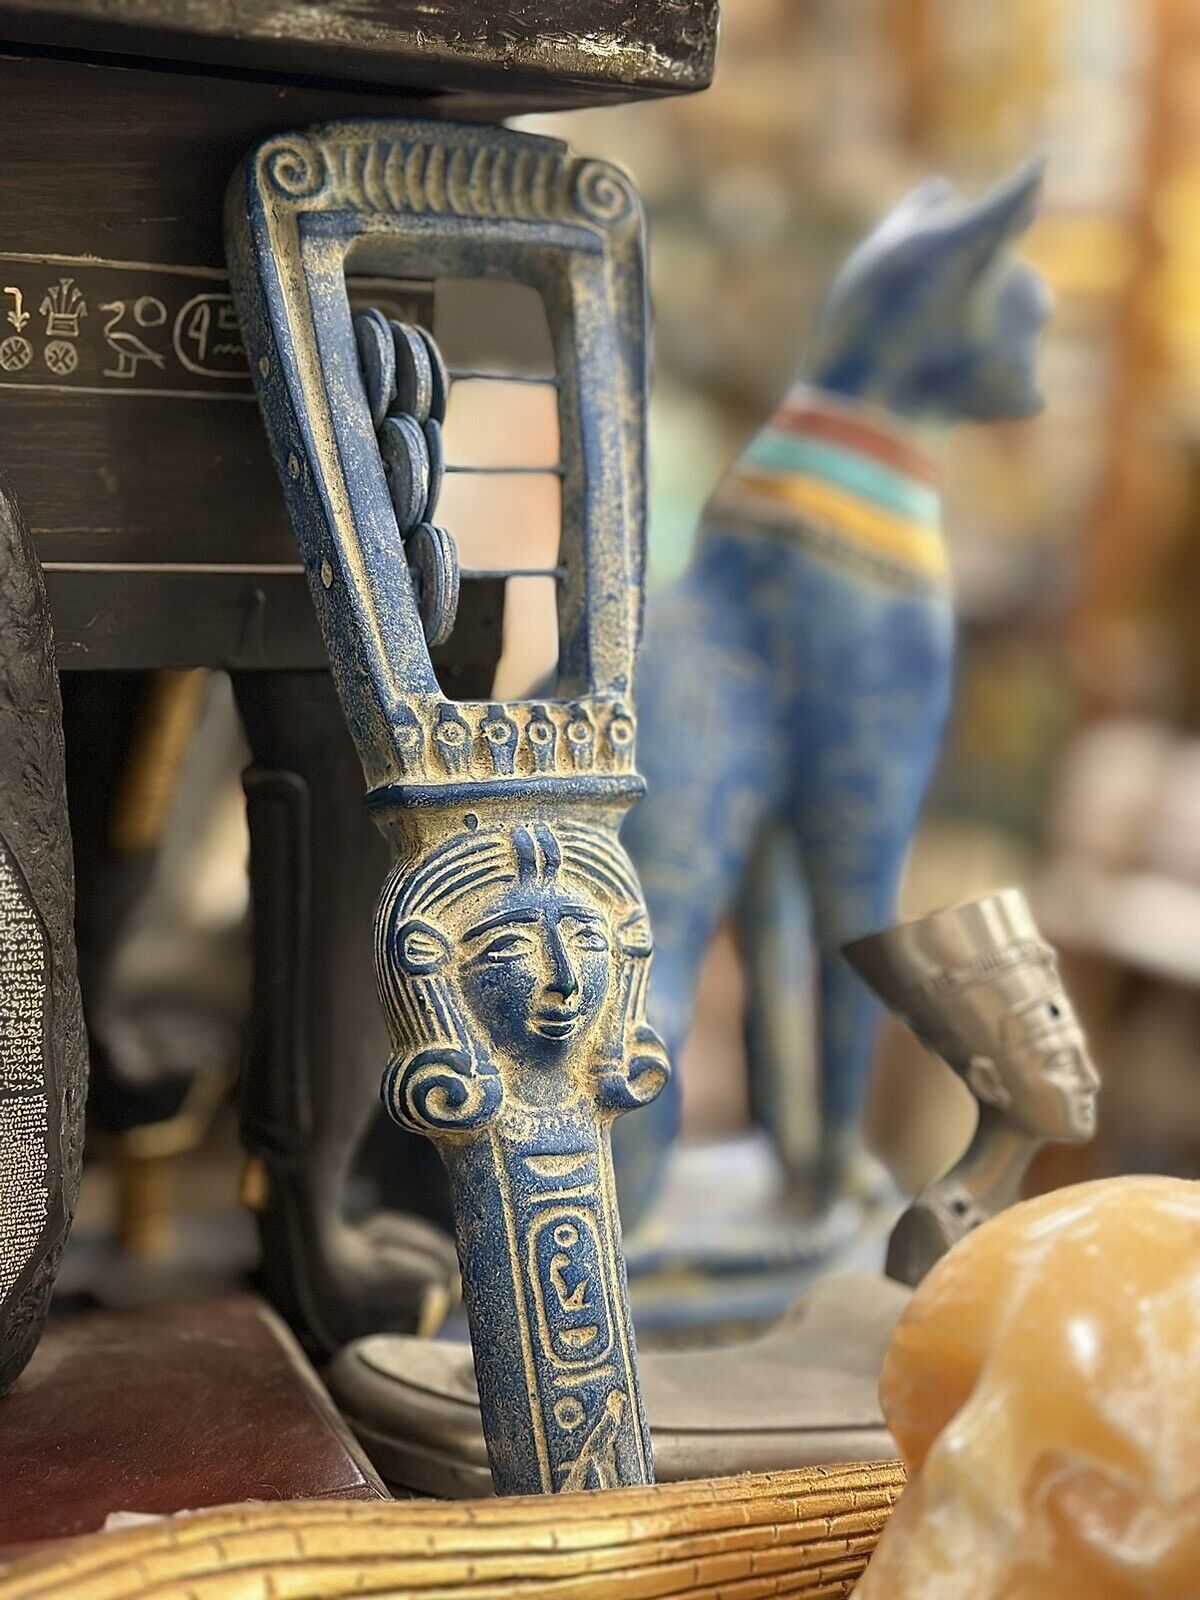 Egyptian art Hathor Sistrum (Musical Instrument) Replica from her collection